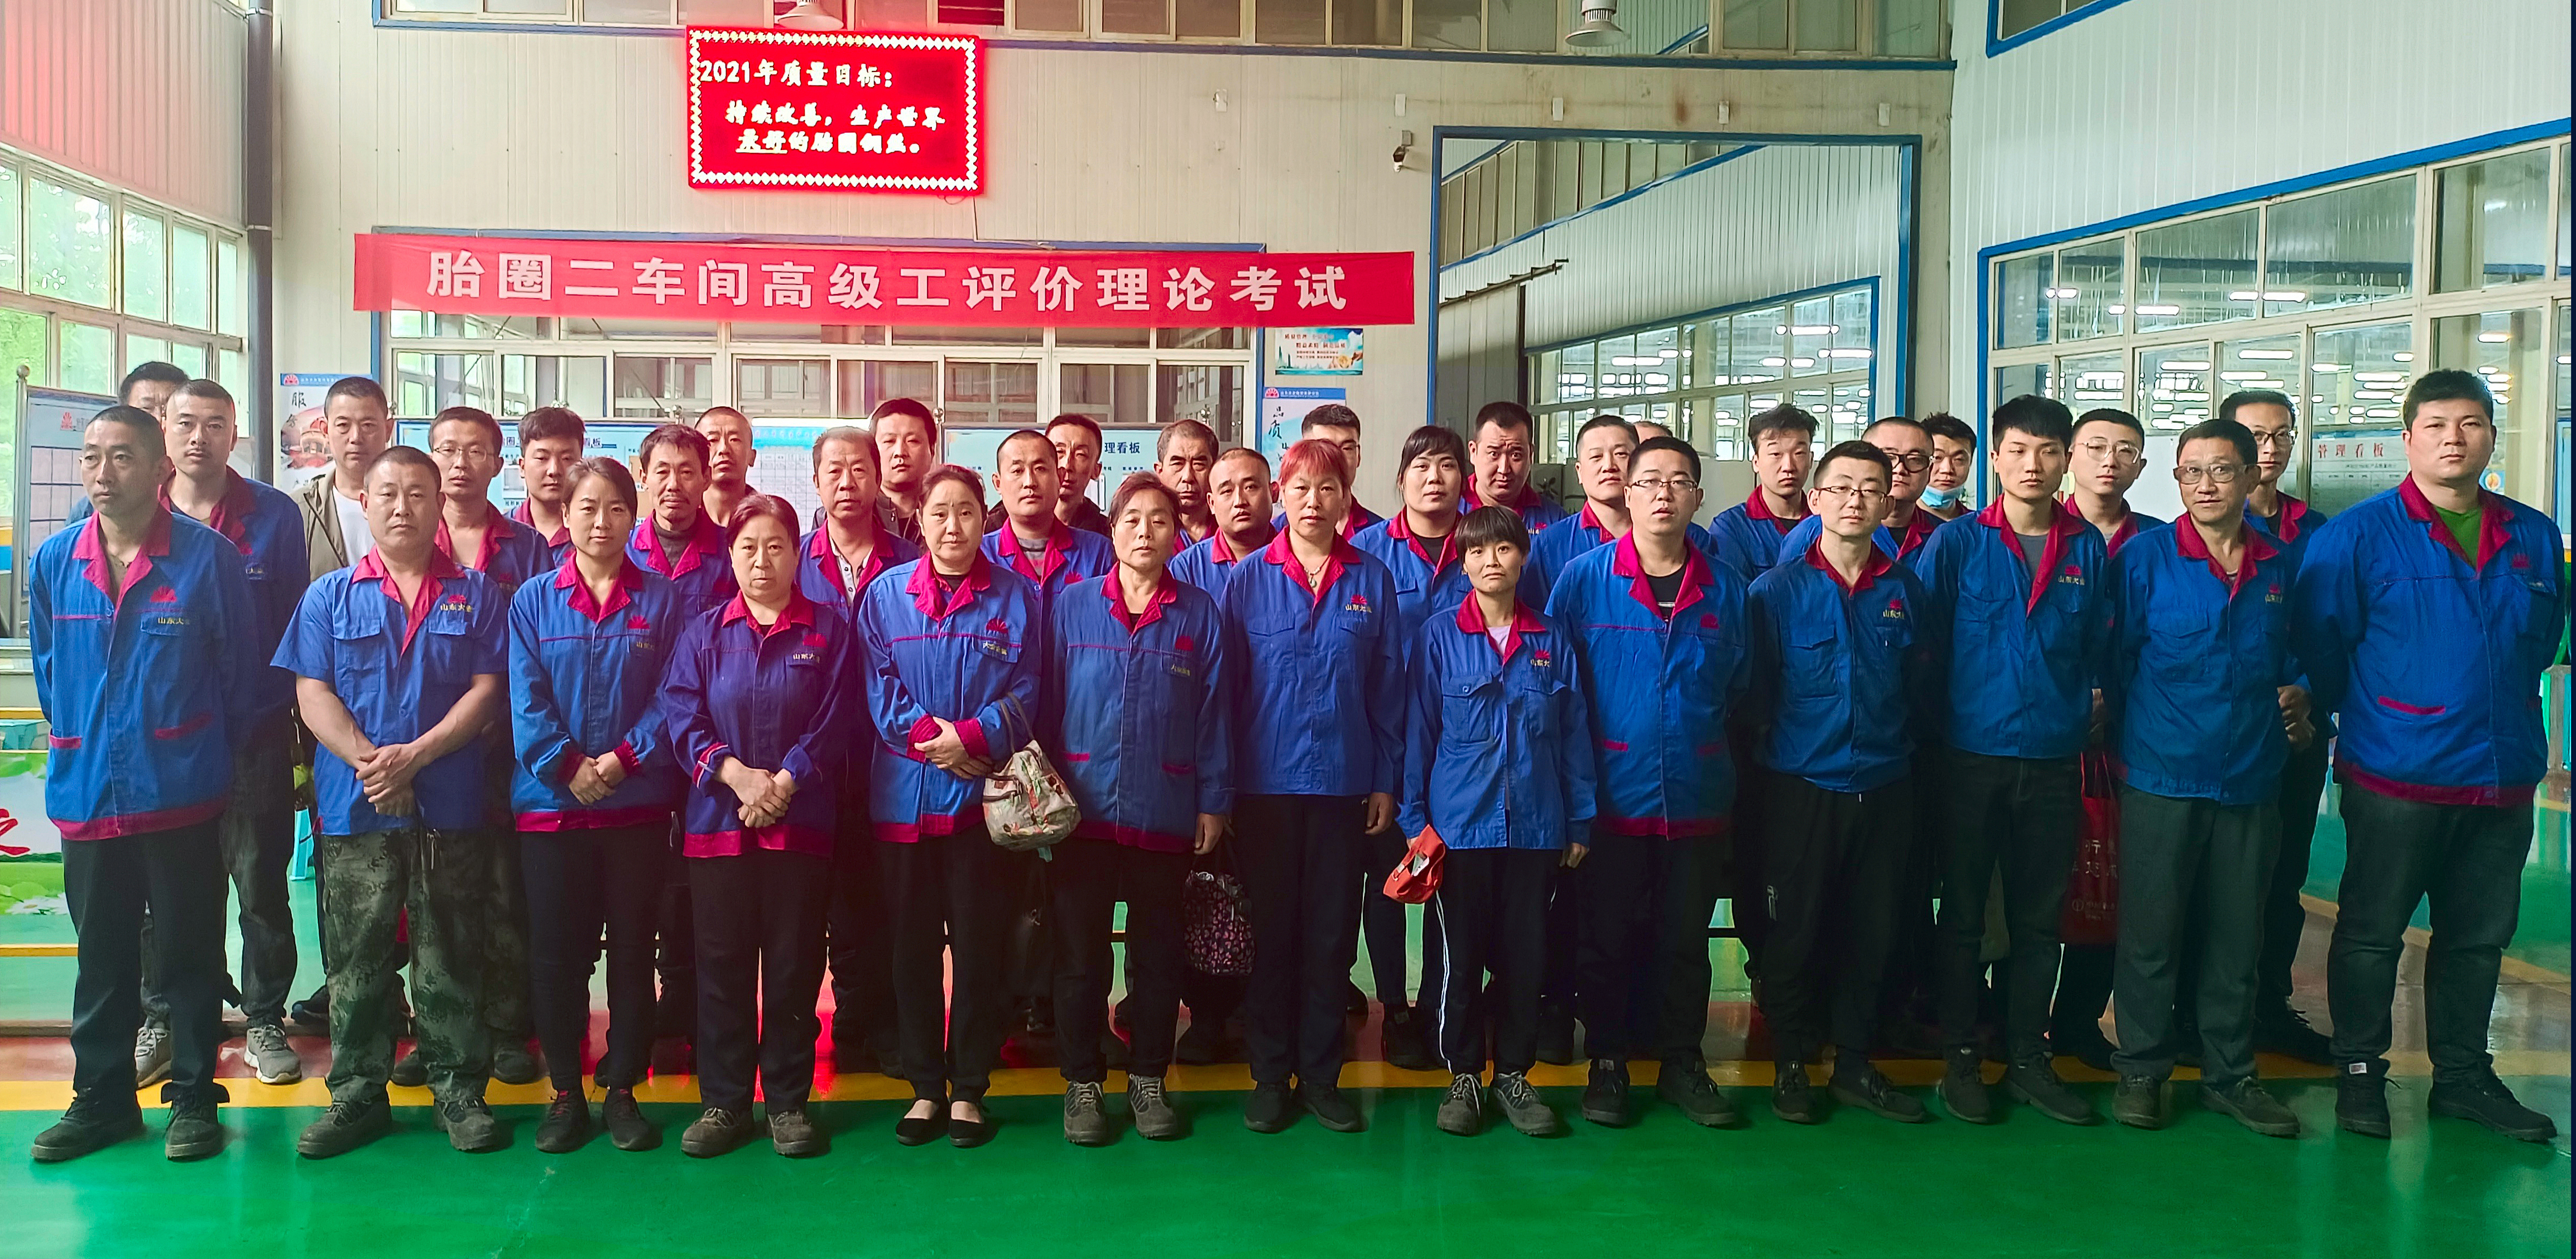 Our company's first bead factory and second workshop plating line Class C was awarded the 